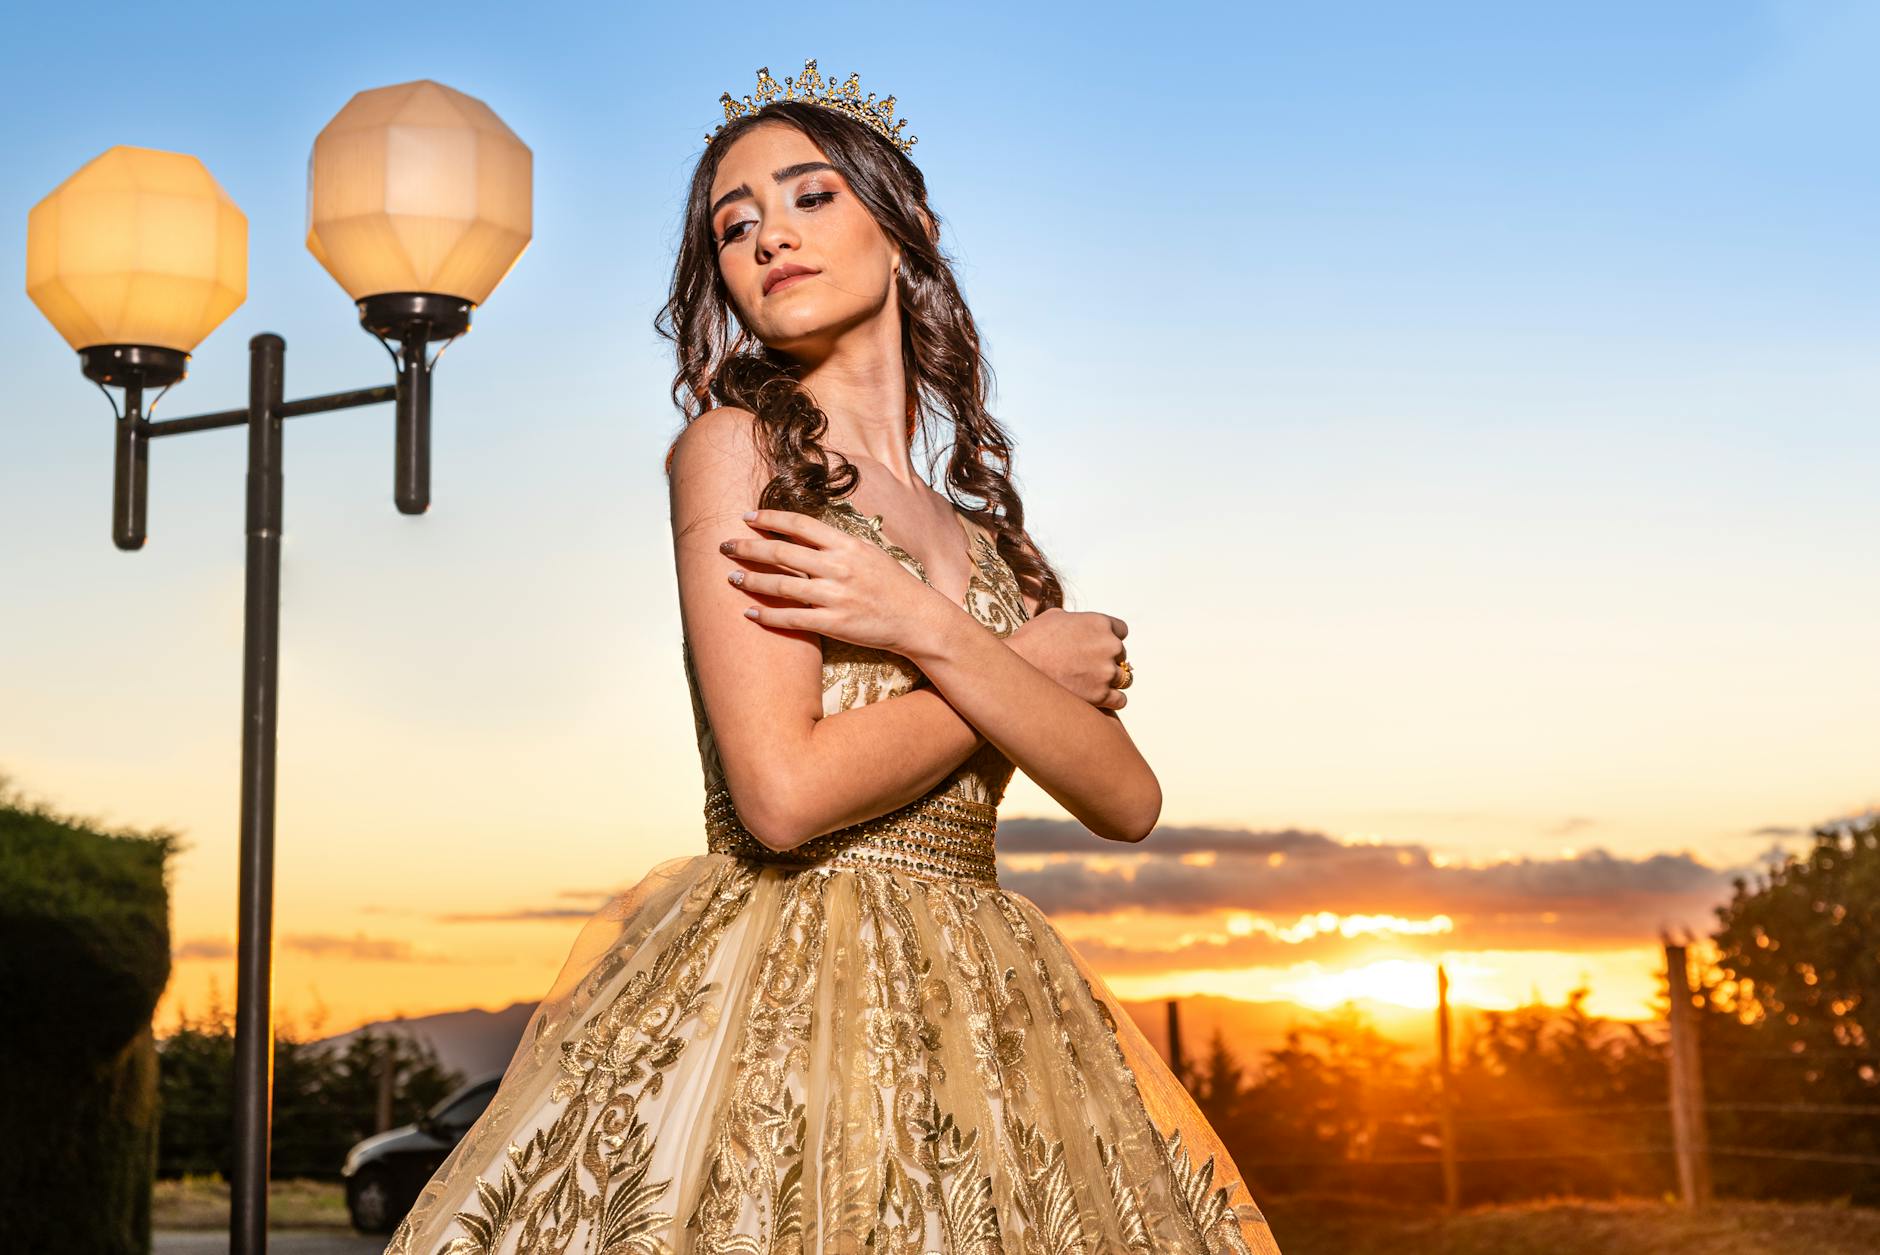 Woman Posing in Golden Dress at Sunset